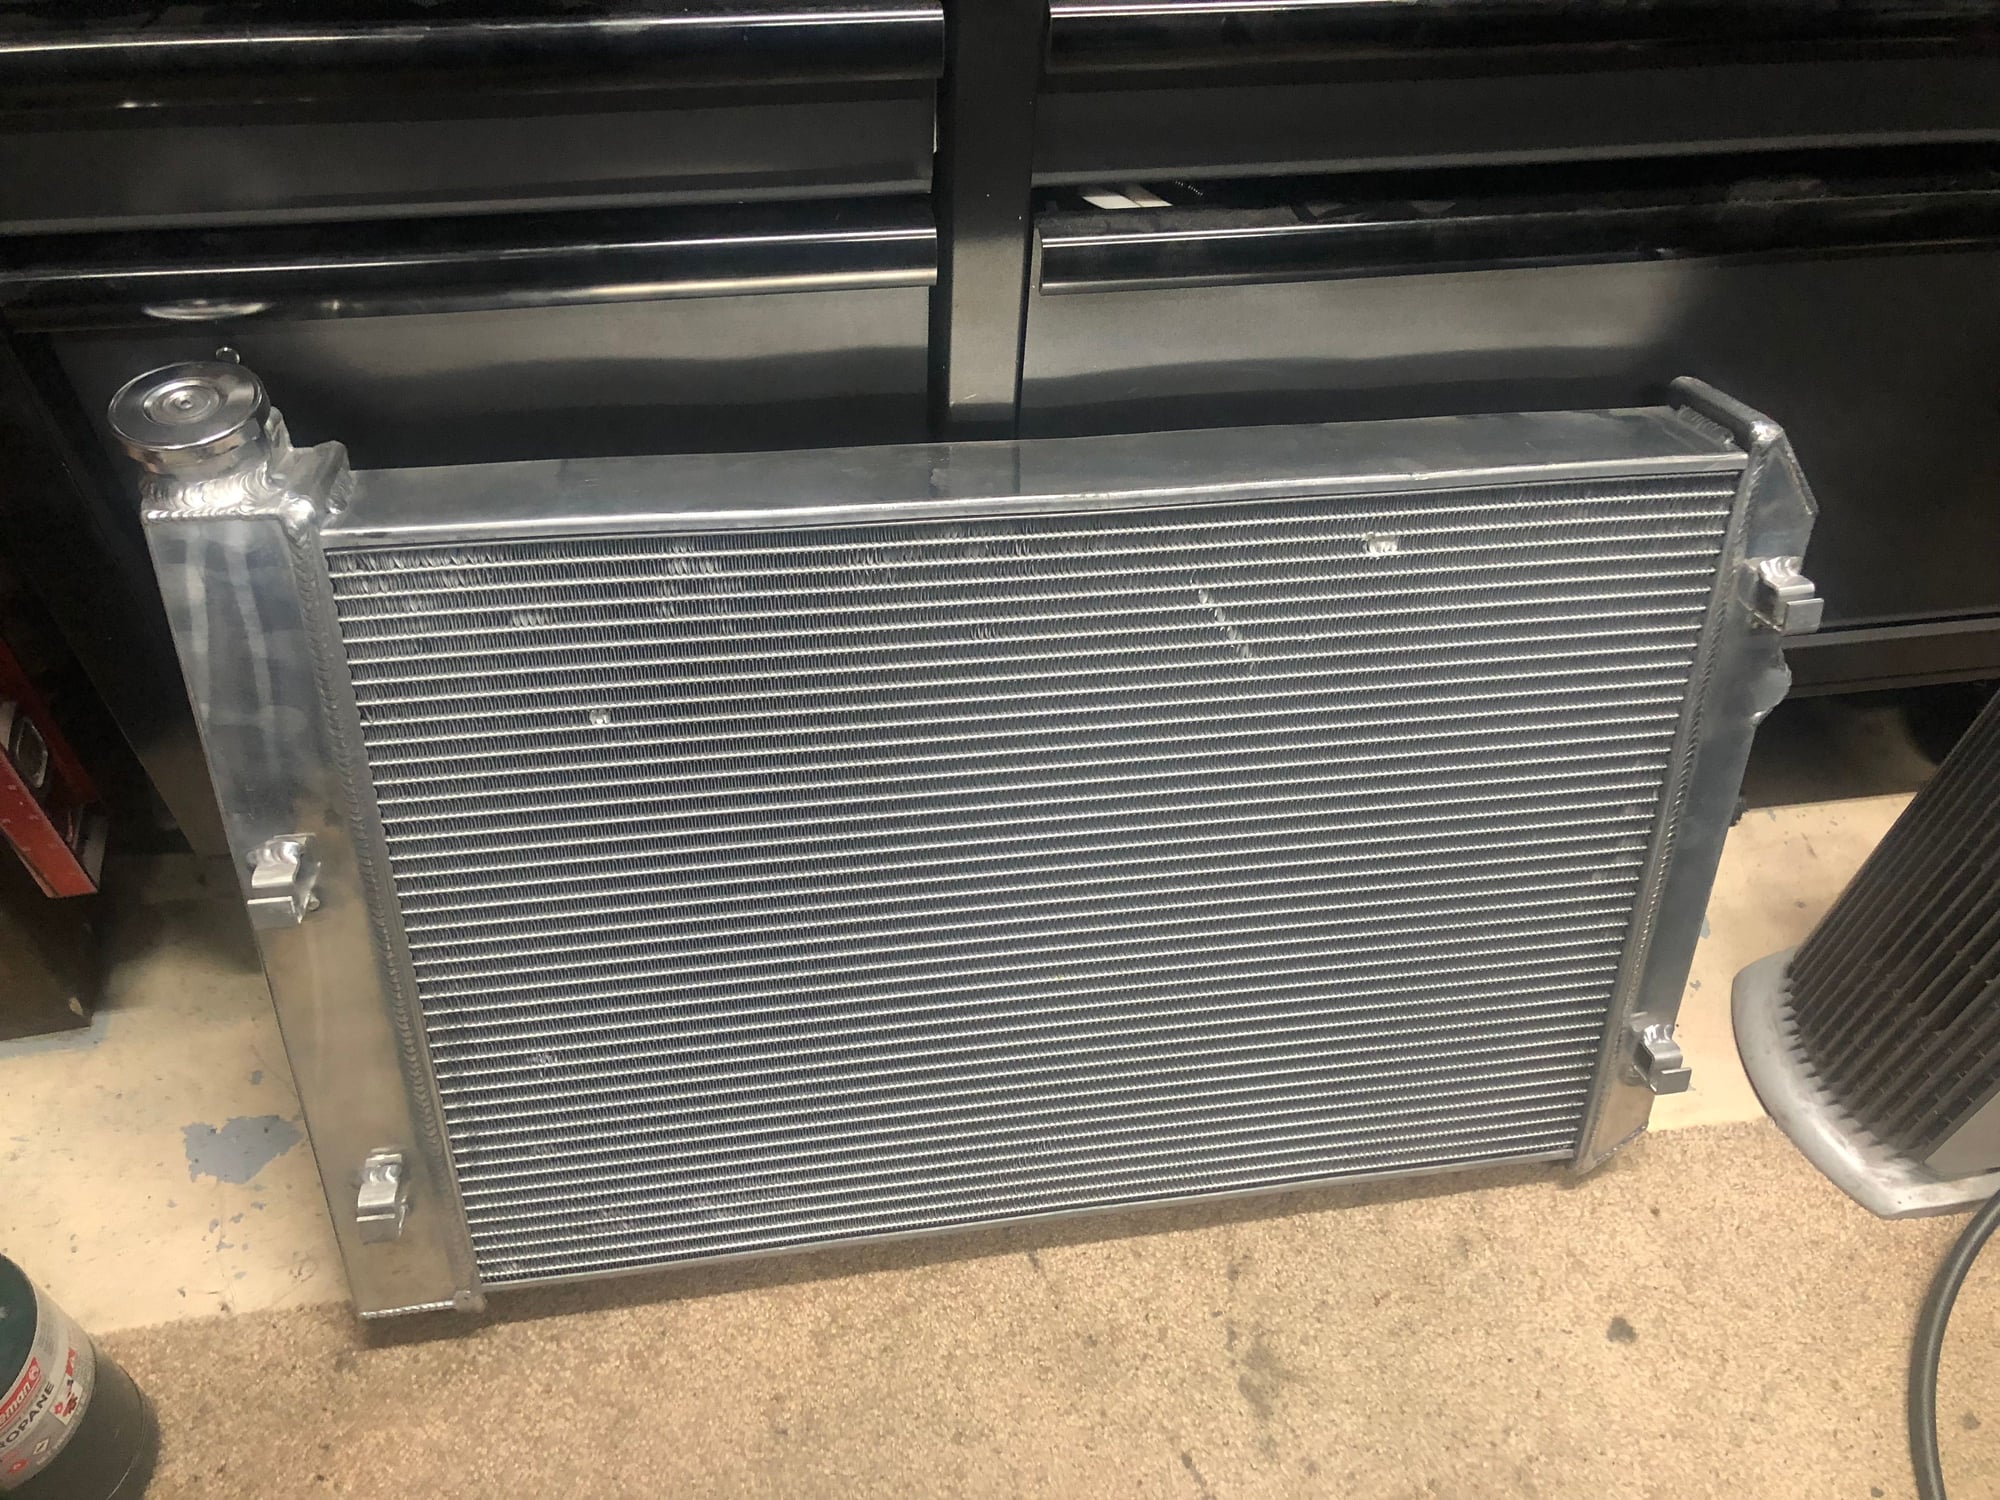 Miscellaneous - New 3in Cold Case radiator for 98-02 camaro/trans-am - New - 1998 to 2002 Chevrolet Camaro - Statesville, NC 28677, United States